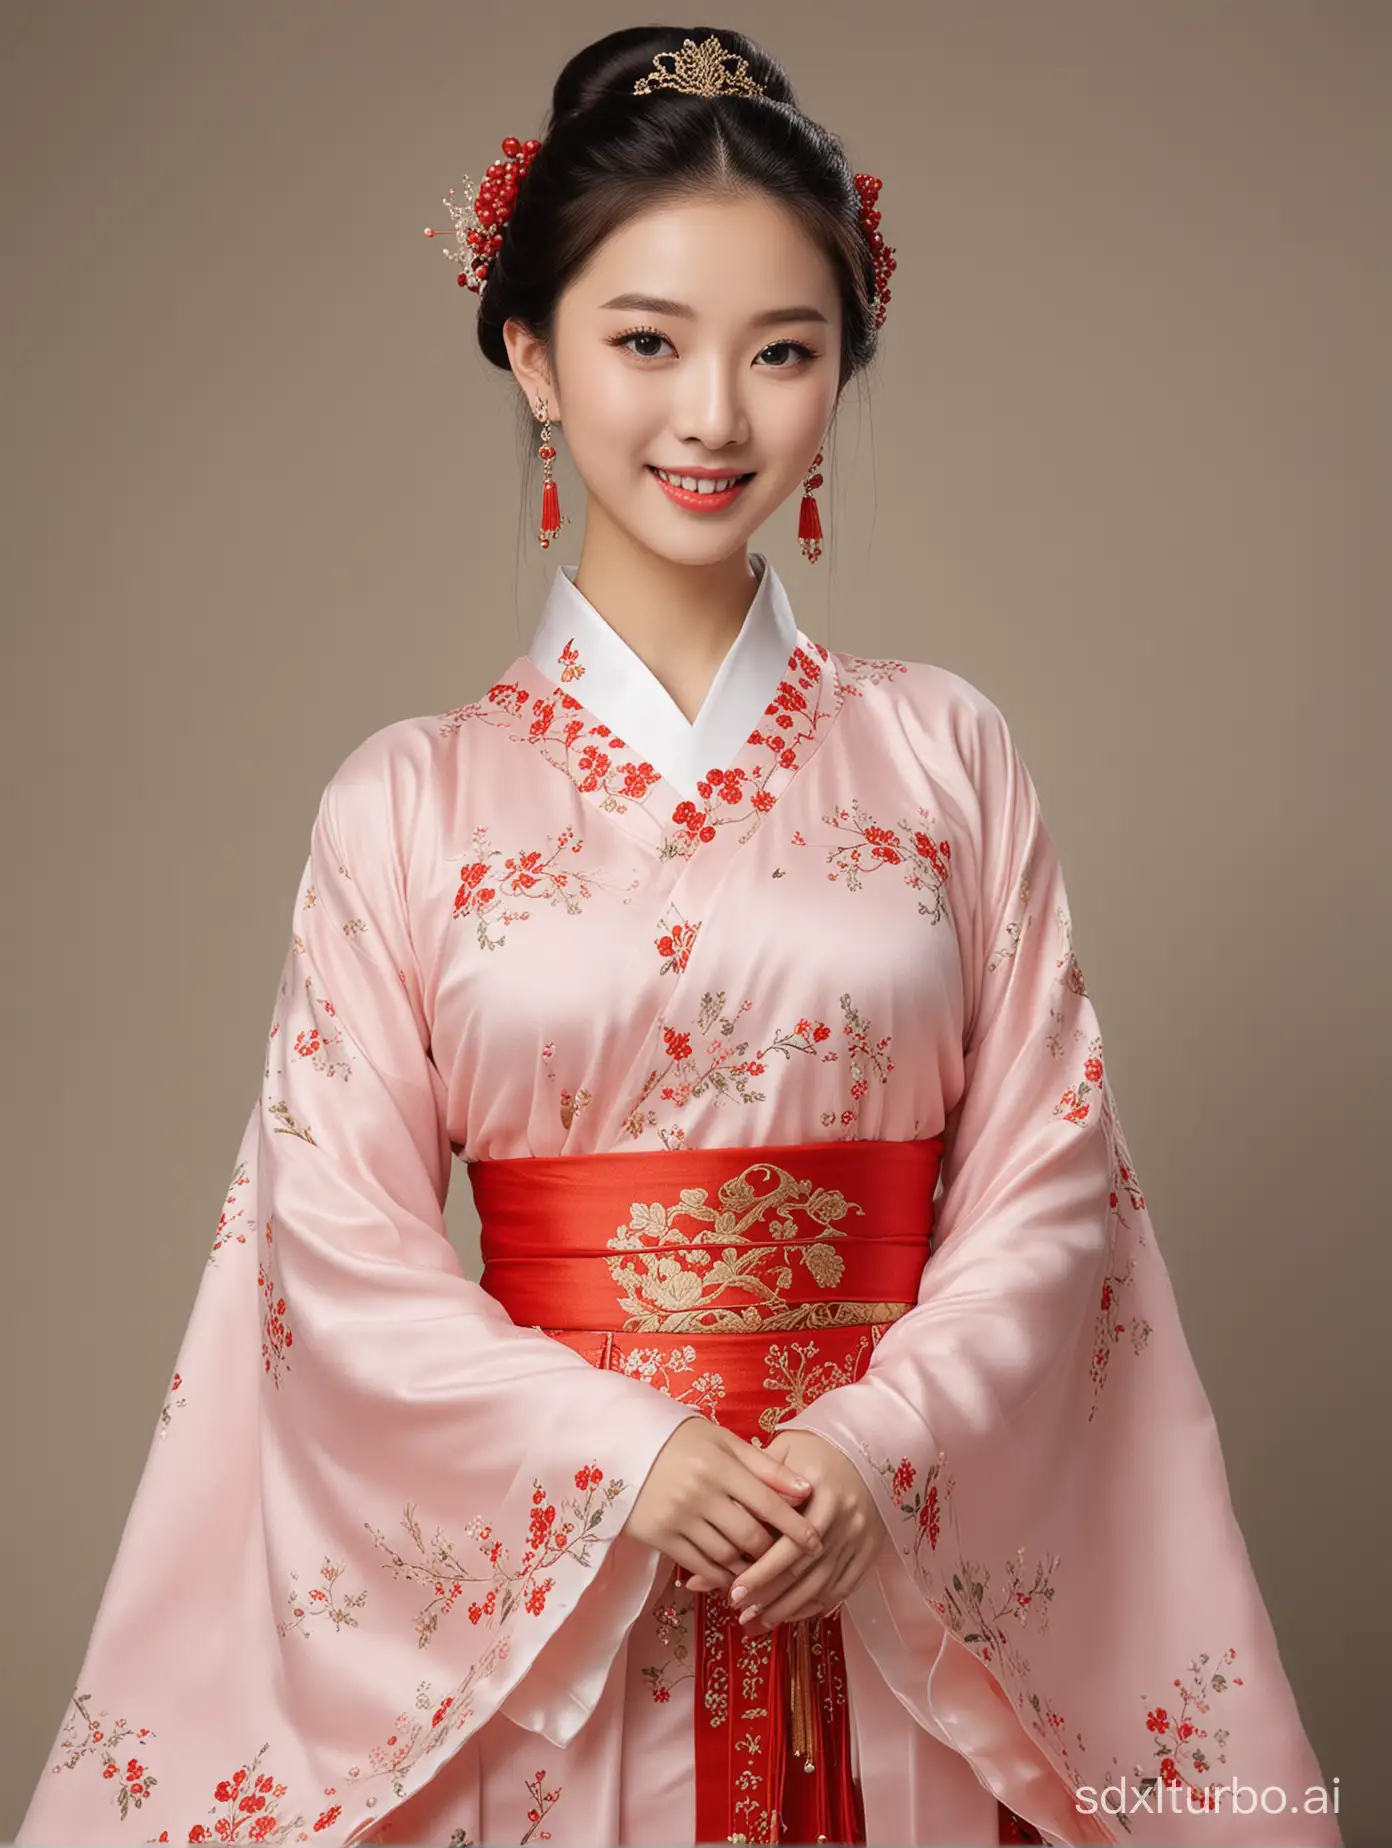 Elegant-Tang-Dynasty-Princess-Portrait-18YearOld-Chinese-Beauty-in-Exquisite-Hanfu-Gown